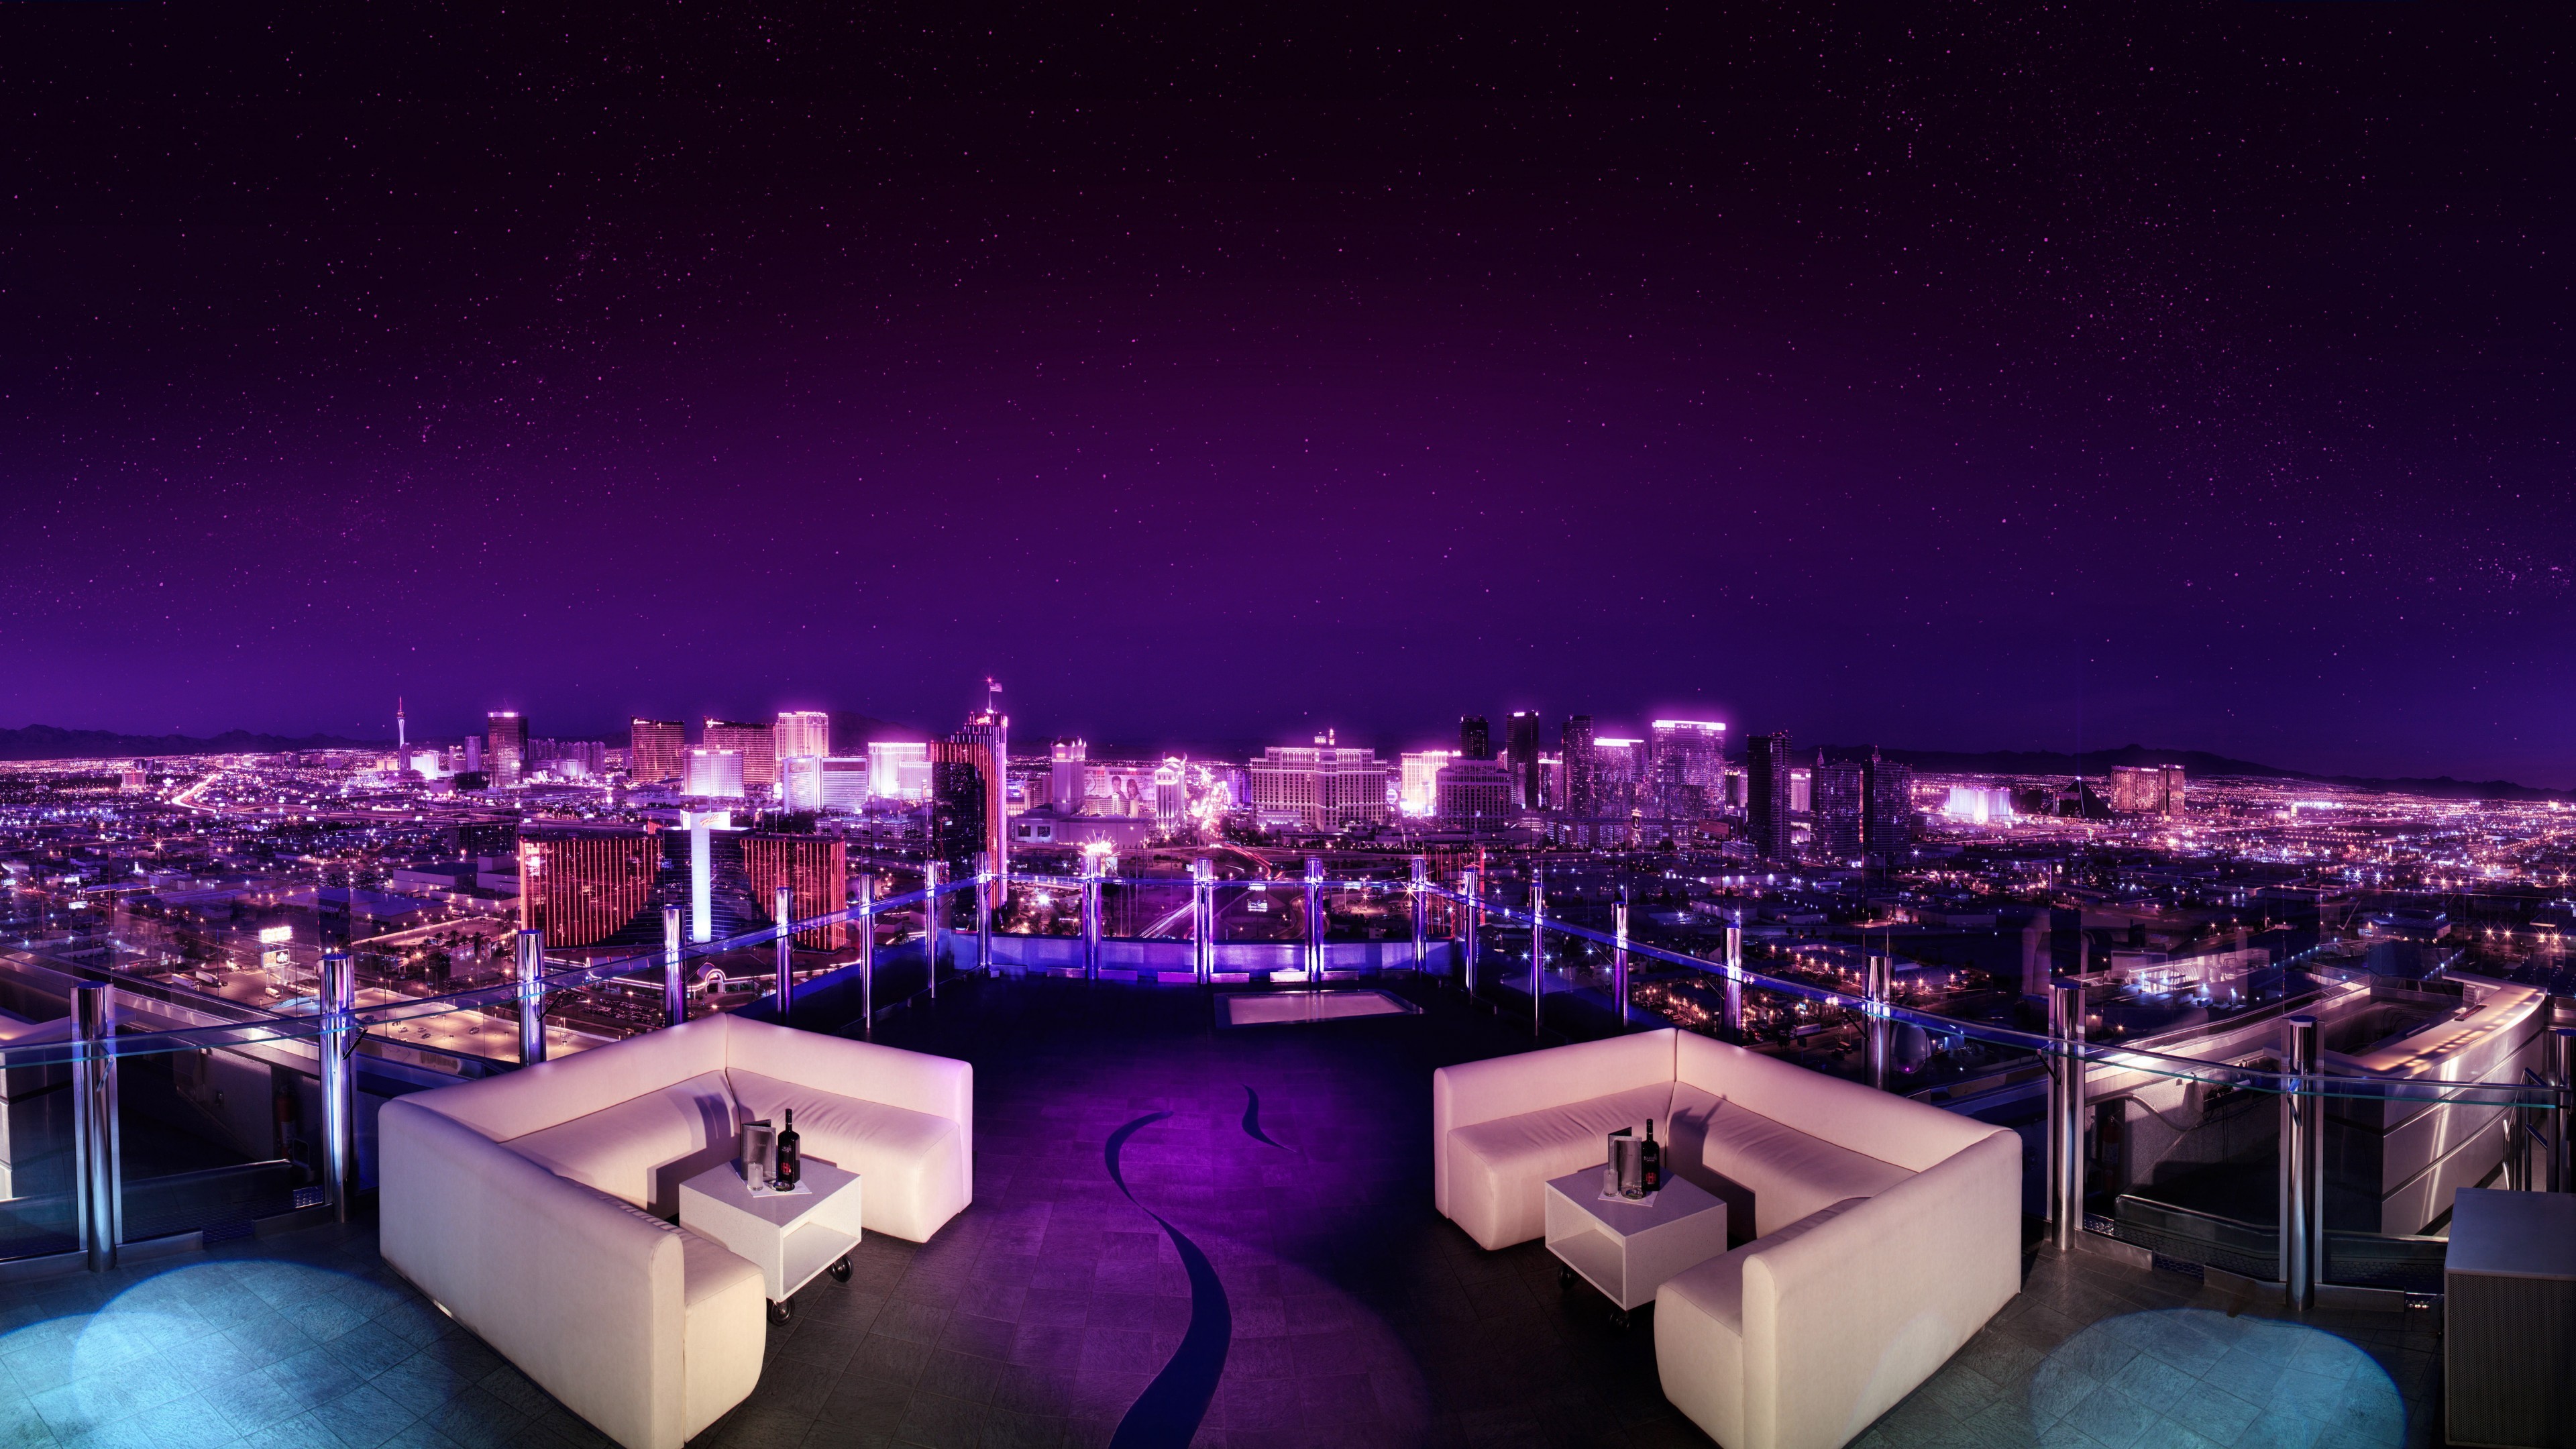 General 3840x2160 purple sky stars cityscape rooftops city lights night sky couch low light